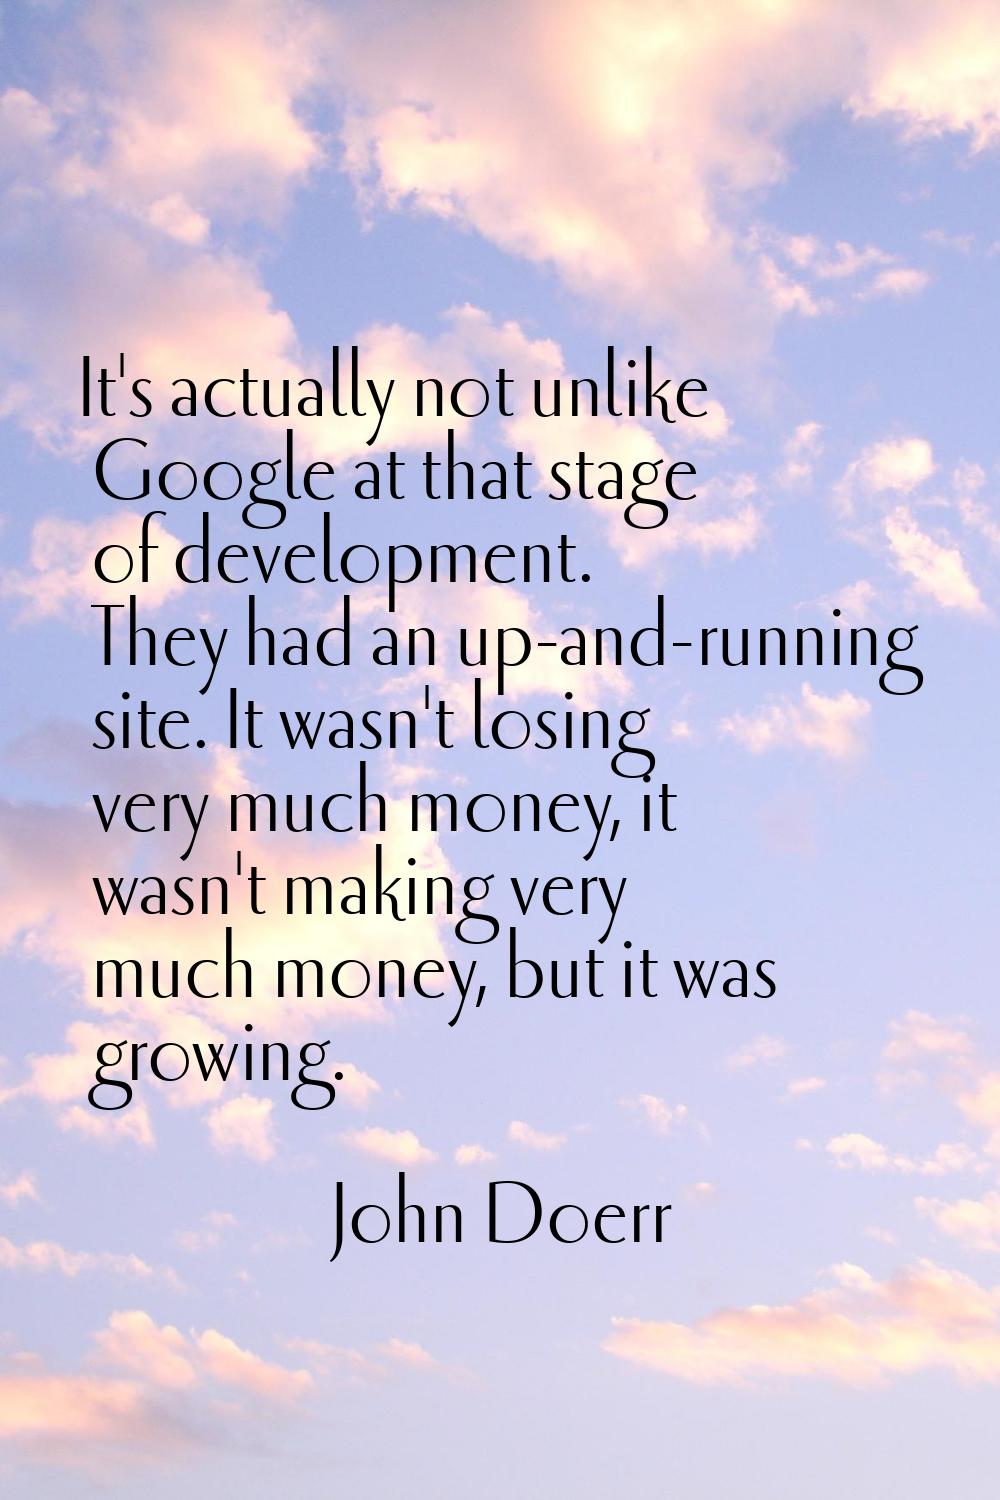 It's actually not unlike Google at that stage of development. They had an up-and-running site. It w